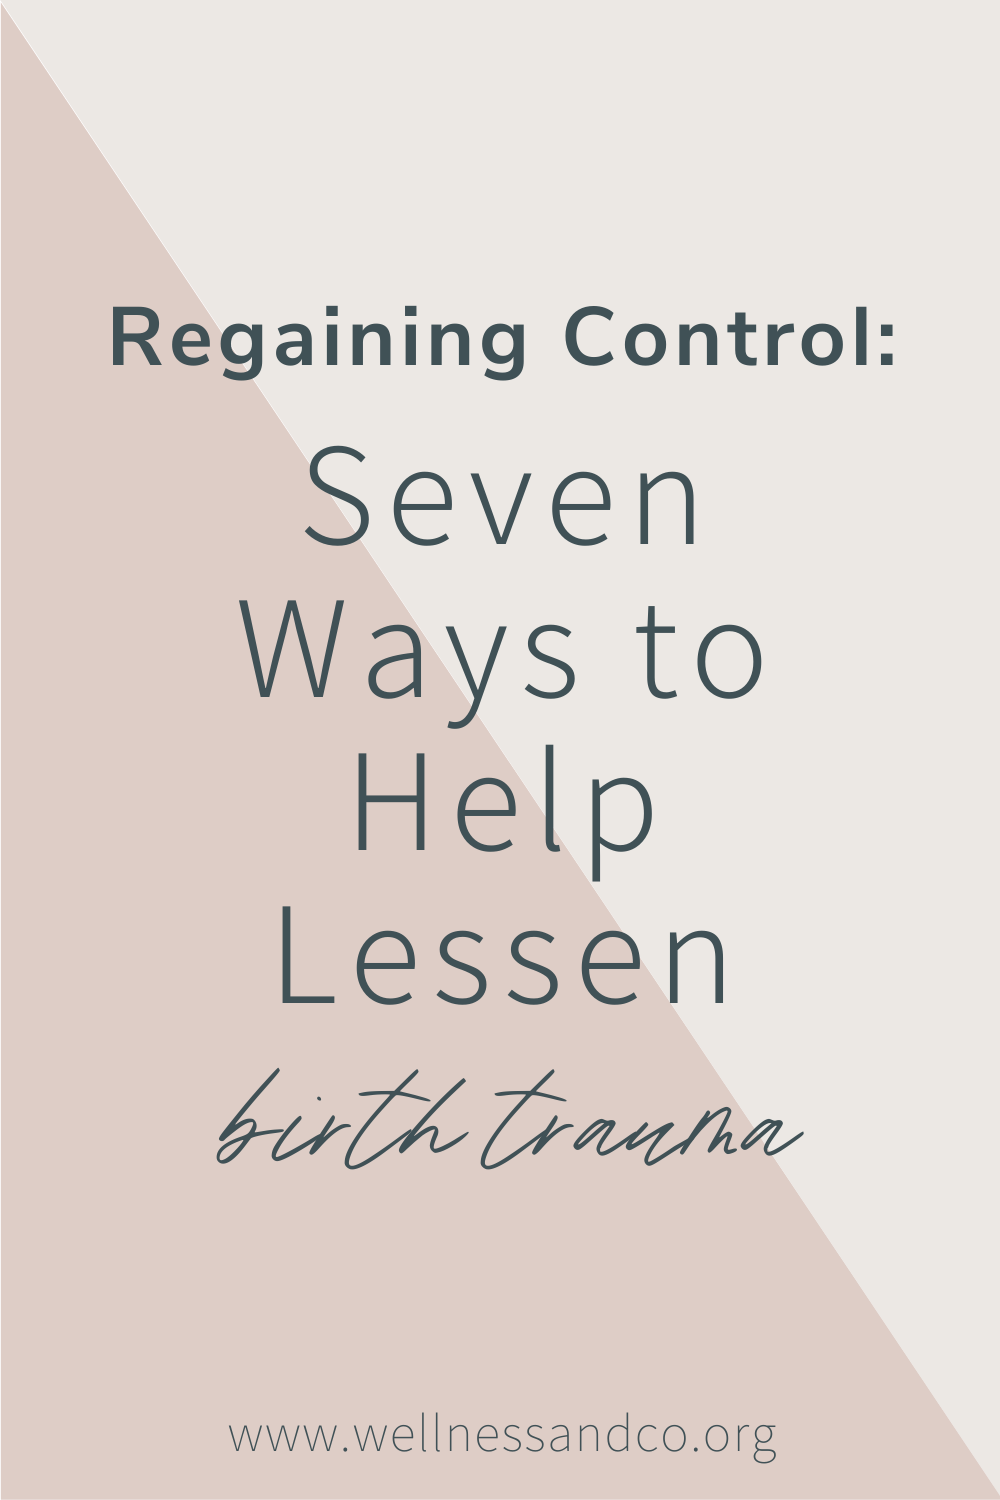 Regaining Control: Seven Ways to Help Lessen Birth Trauma | Having a traumatic birth experience is more common than many new moms realize. Did you know there are many things you can do to prepare and help lessen/prevent this trauma? Breathe deep, while birth can be scary and overwhelming you can also be informed and educated on what your rights are and how to advocate for yourself. This blog offers seven tips to help lessen birth trauma, read on!